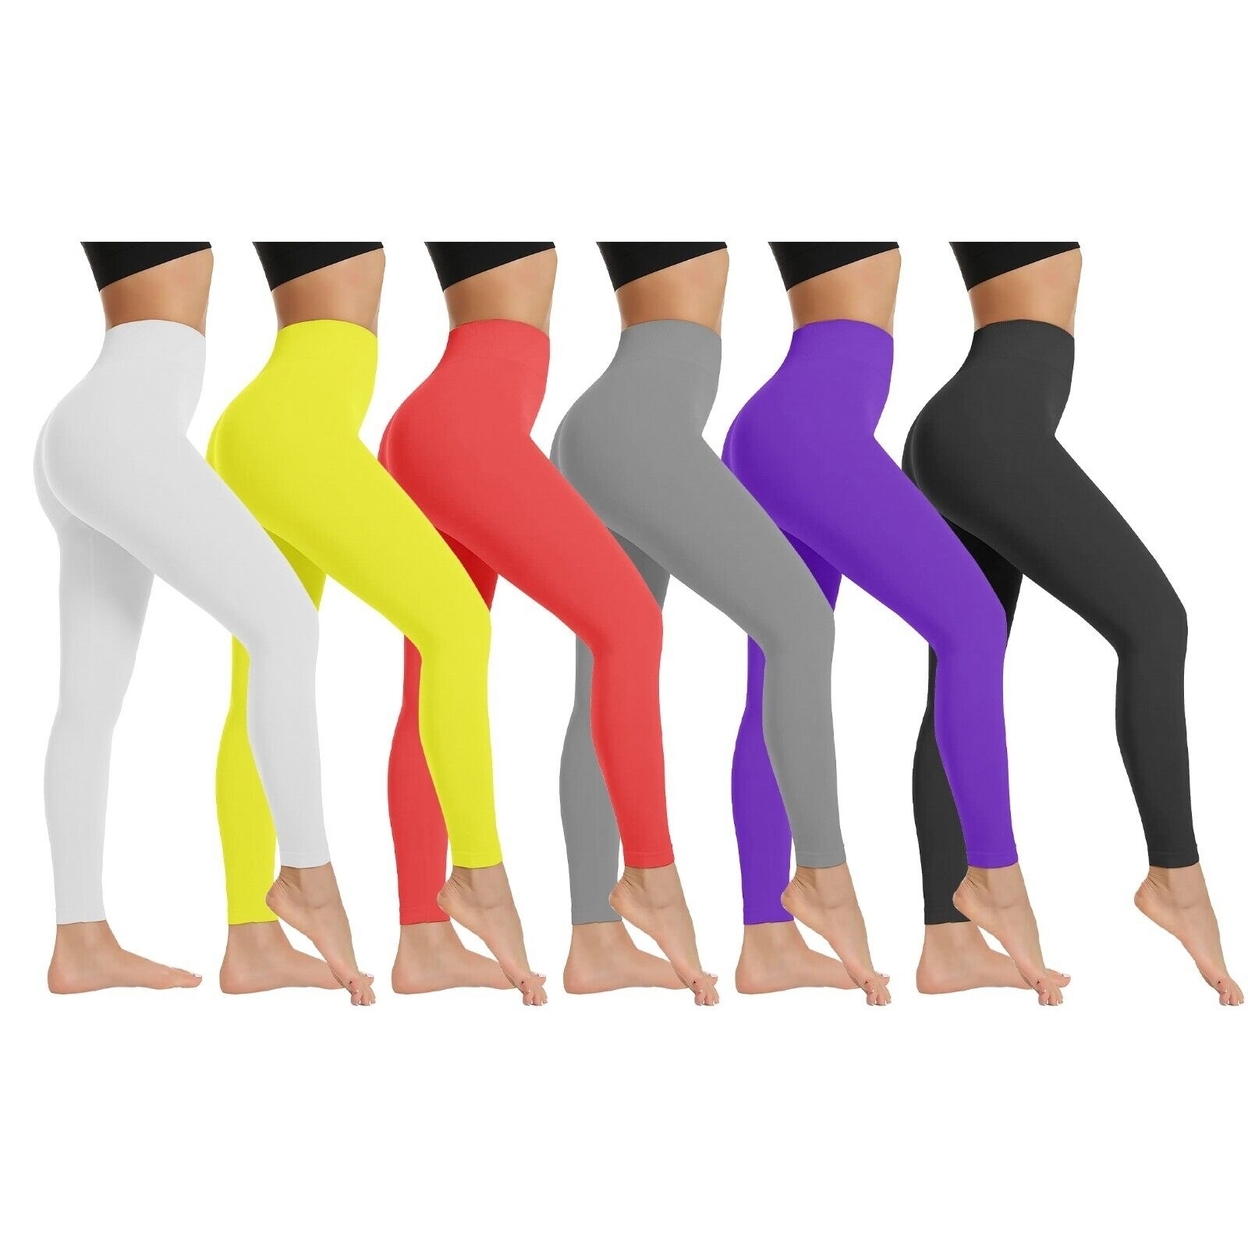 2-Pack: Women's High Waist Super Soft Active Athlete Stretch Yoga Cozy Leggings - Yellow & Red, X-large